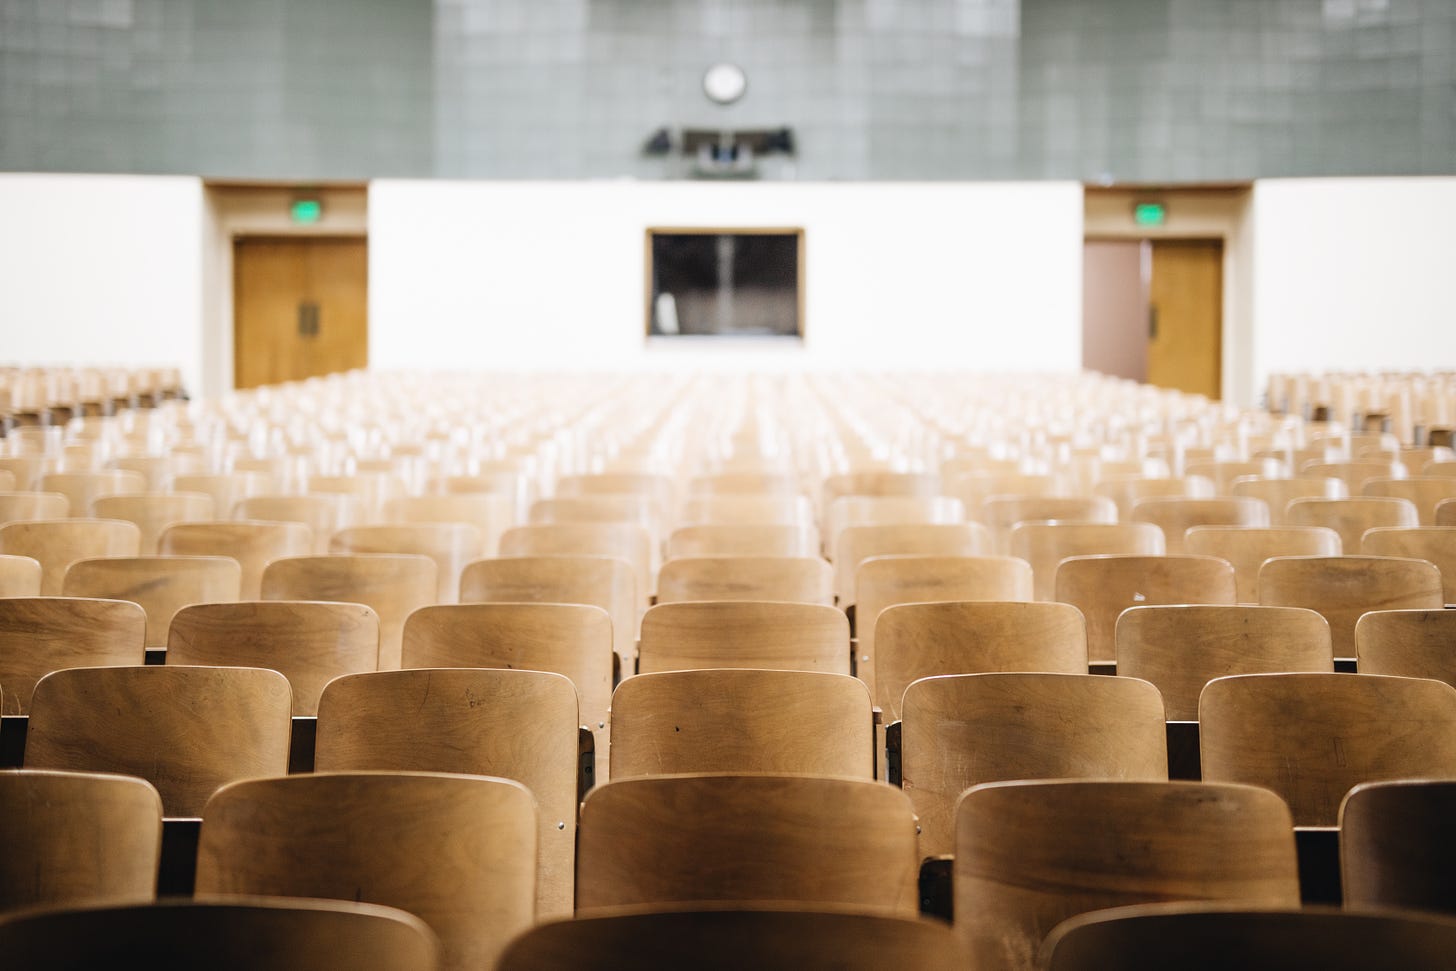 An empty lecture hall filled with chairs, shot so that we're drawn to the fuzzy focus in the middle.